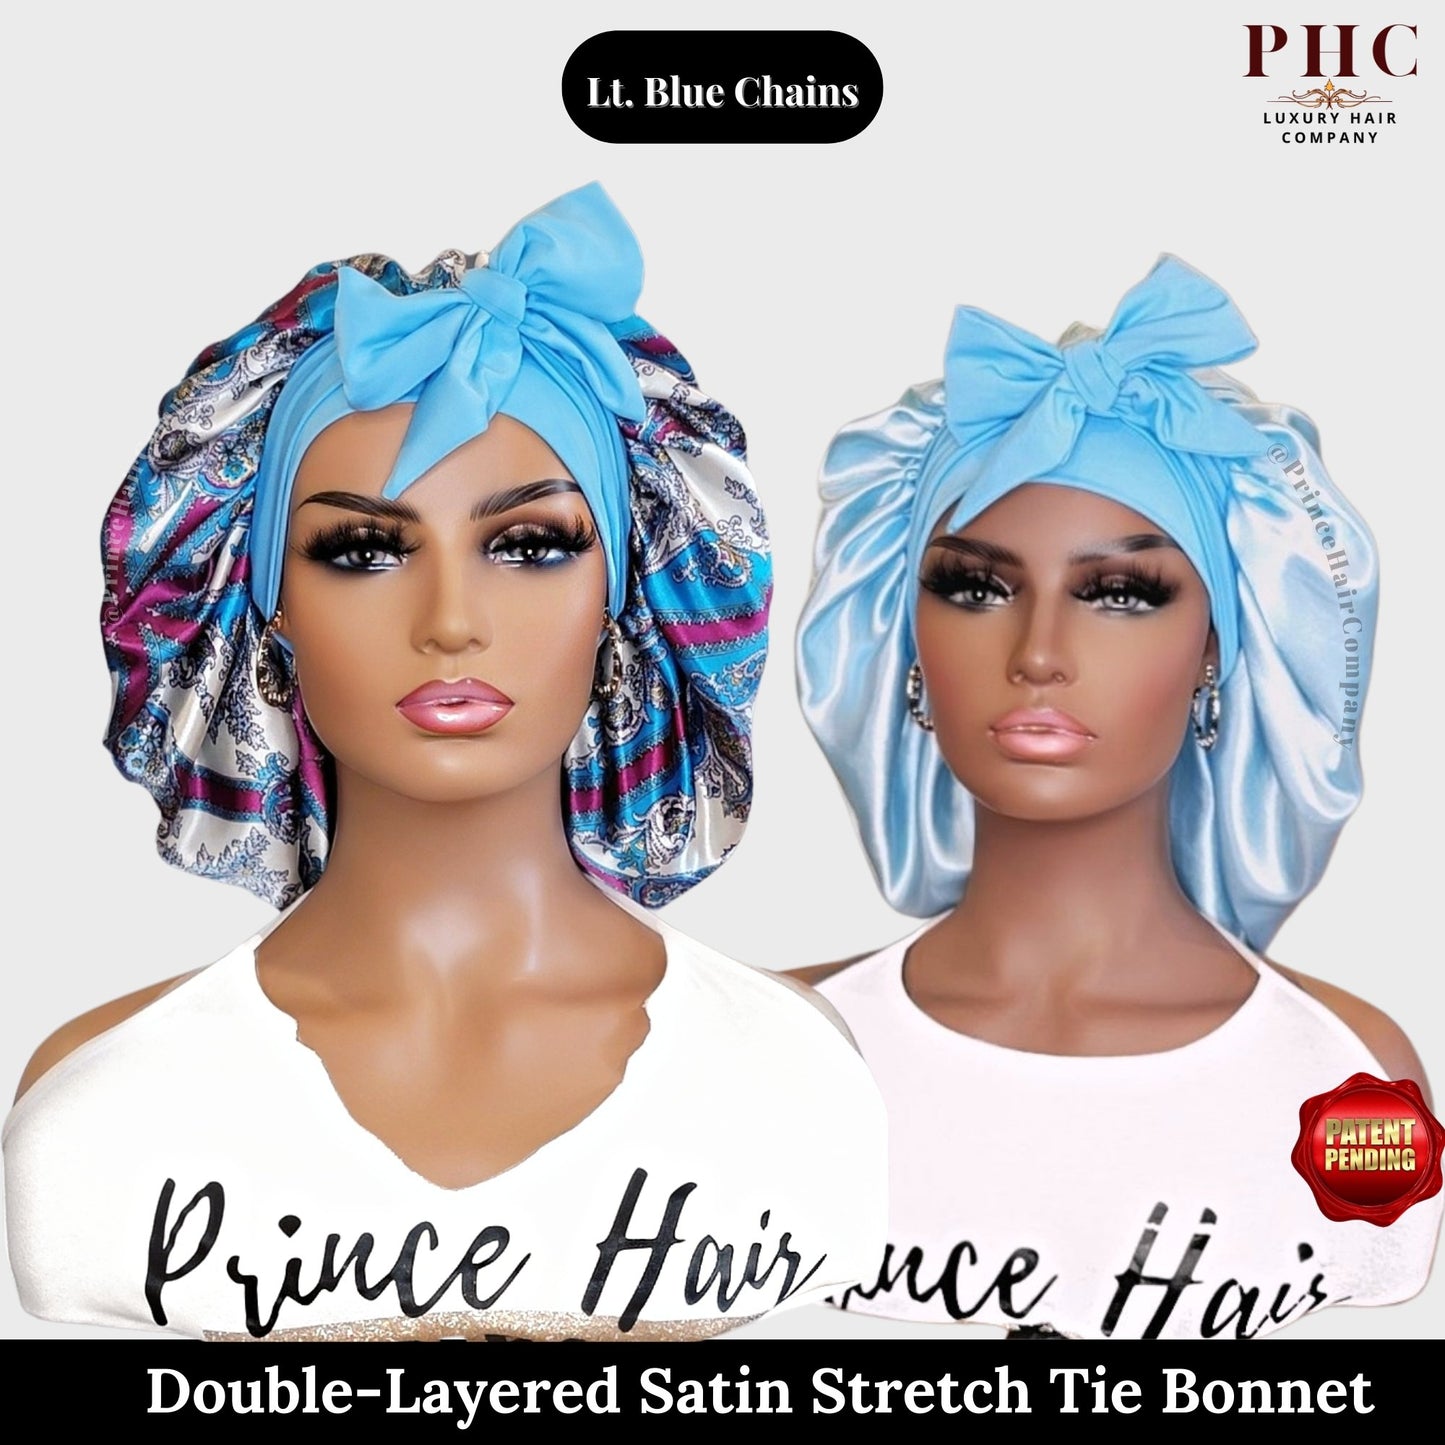 The "Original" Double-Layered Stretch Tie Satin Bonnet - PHC